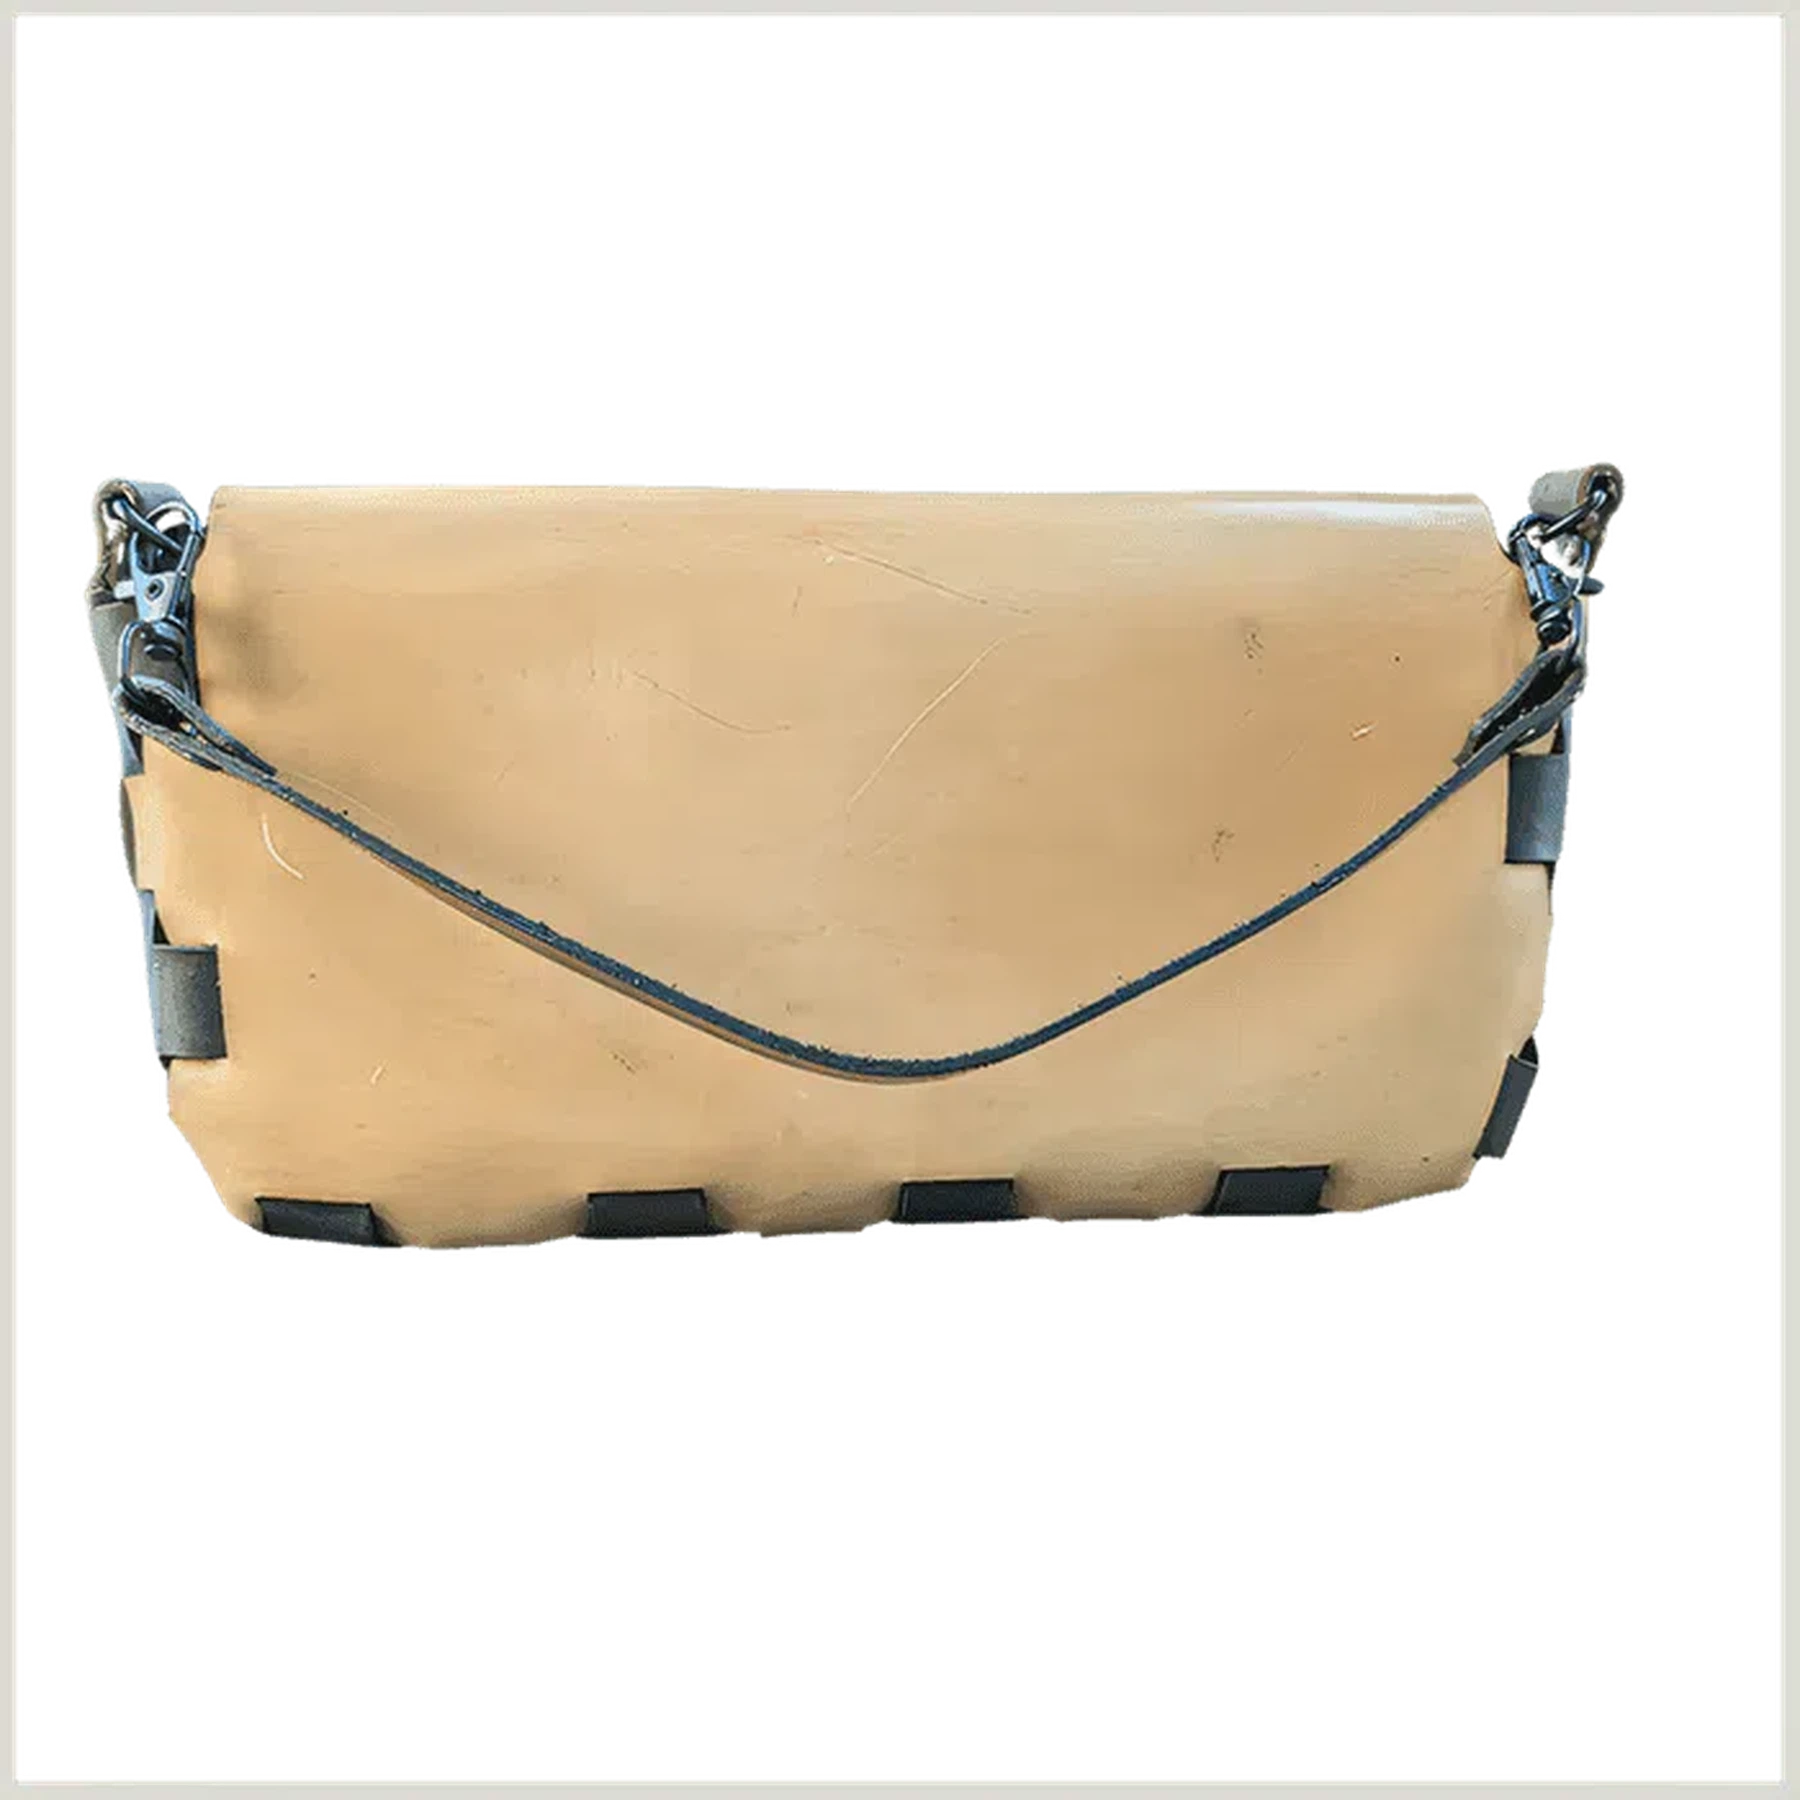 Hand-Crafted Two-Toned Leather Clutch Purse